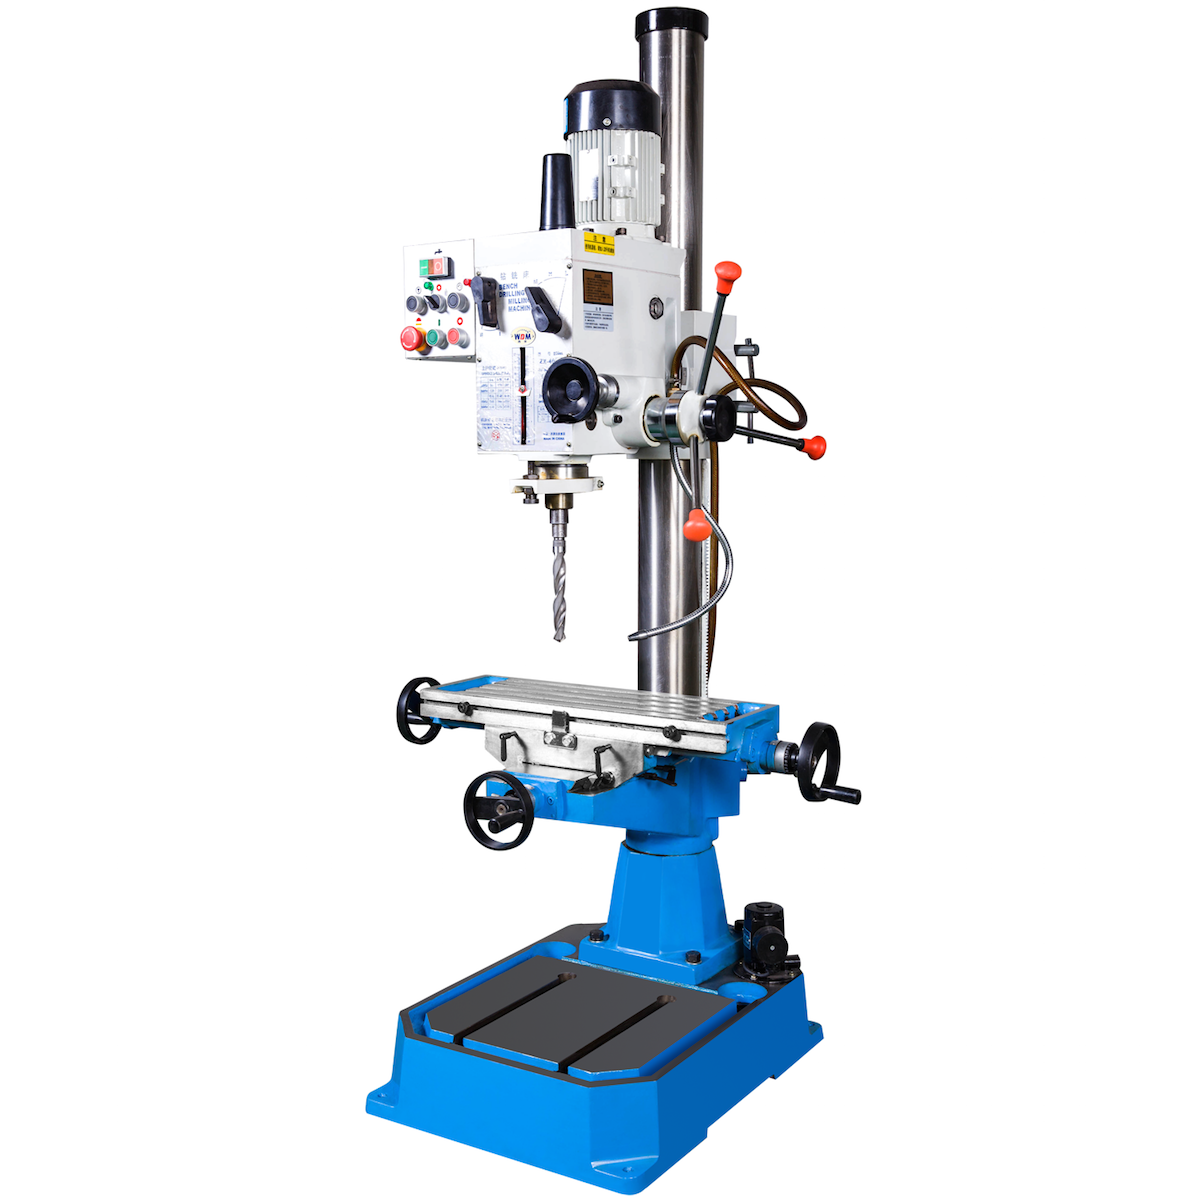 Xest Ling Drilling & Milling Machine 40mm,750W ZX-40PC